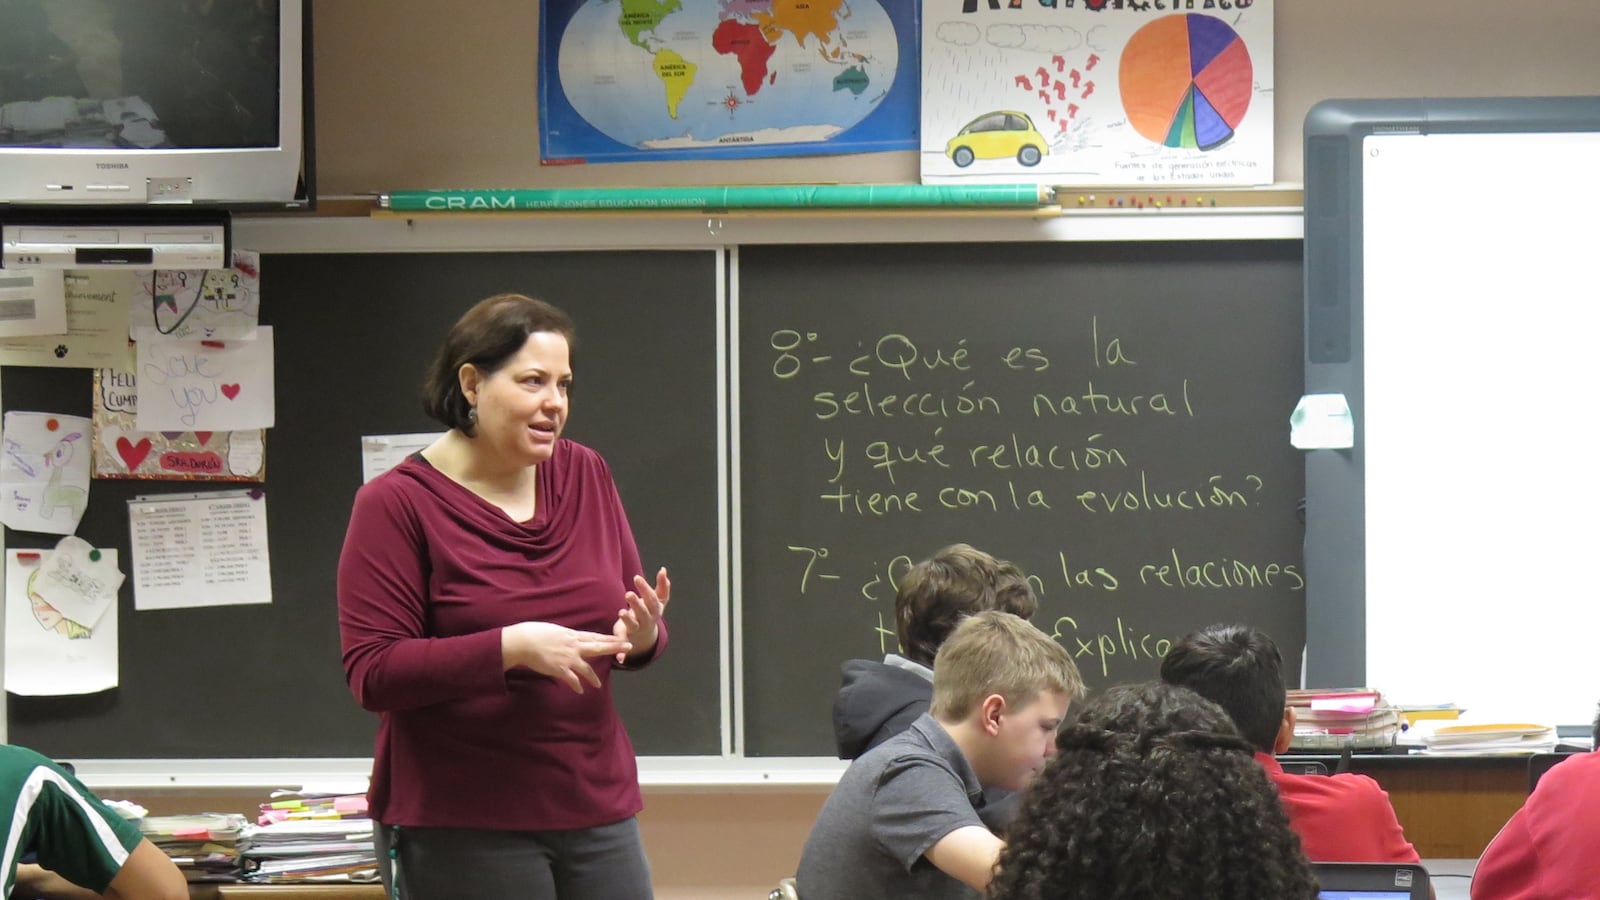 A woman in a maroon blouse instructs her class, standing in between the desks of her students